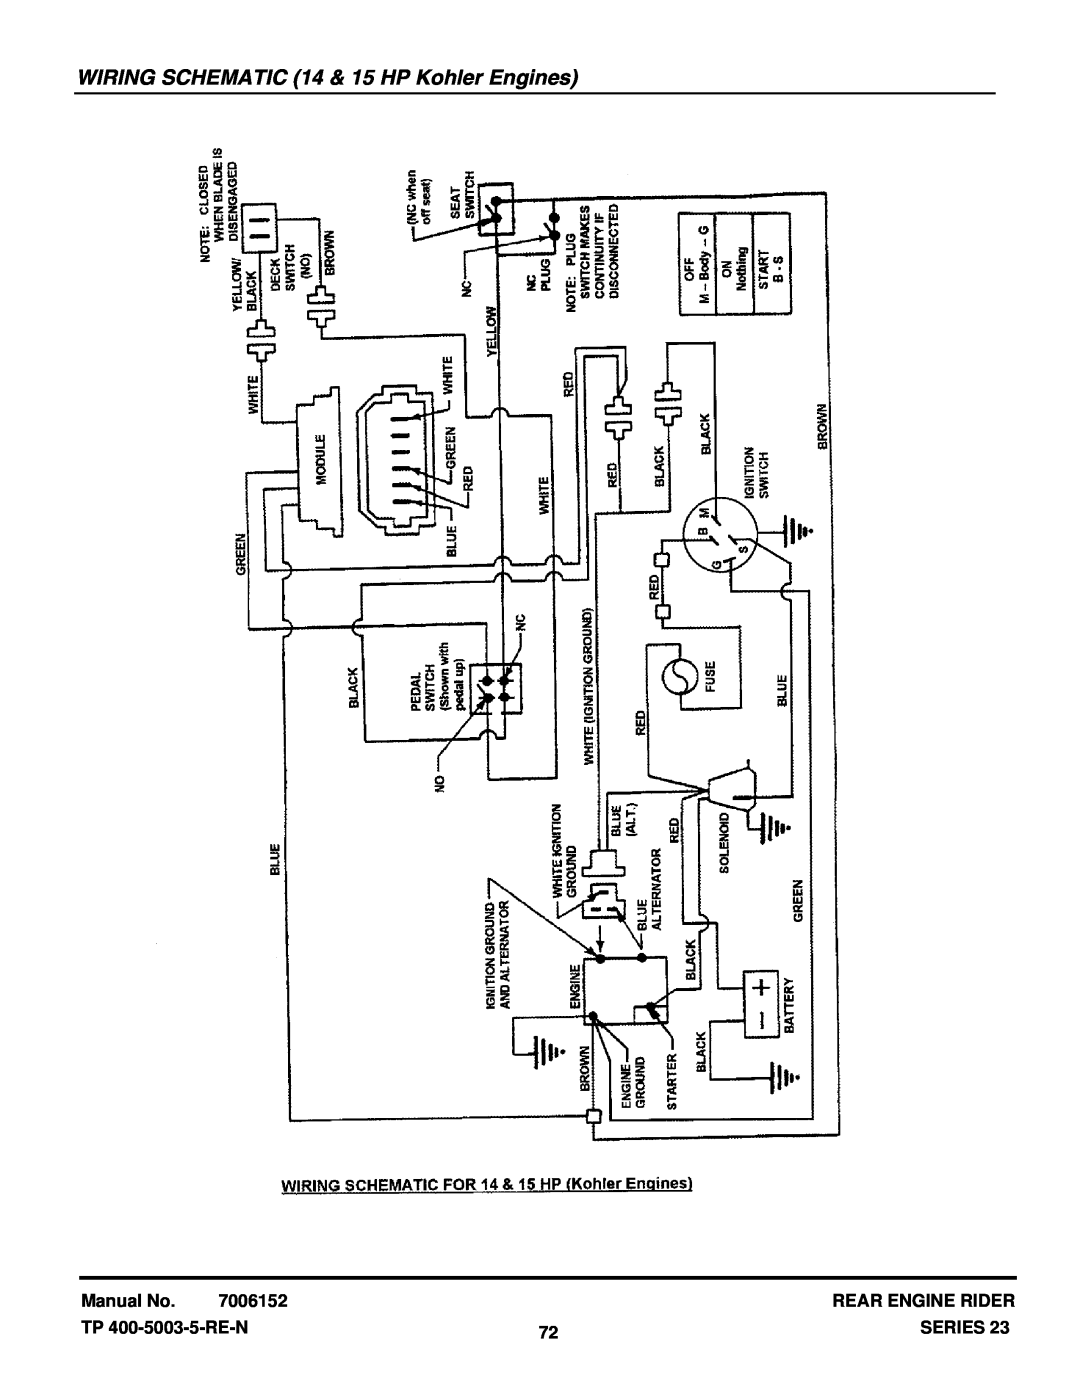 Snapper 281023BVE WIRING SCHEMATIC 14 & 15 HP Kohler Engines, Manual No, 7006152, Rear Engine Rider, TP 400-5003-5-RE-N 